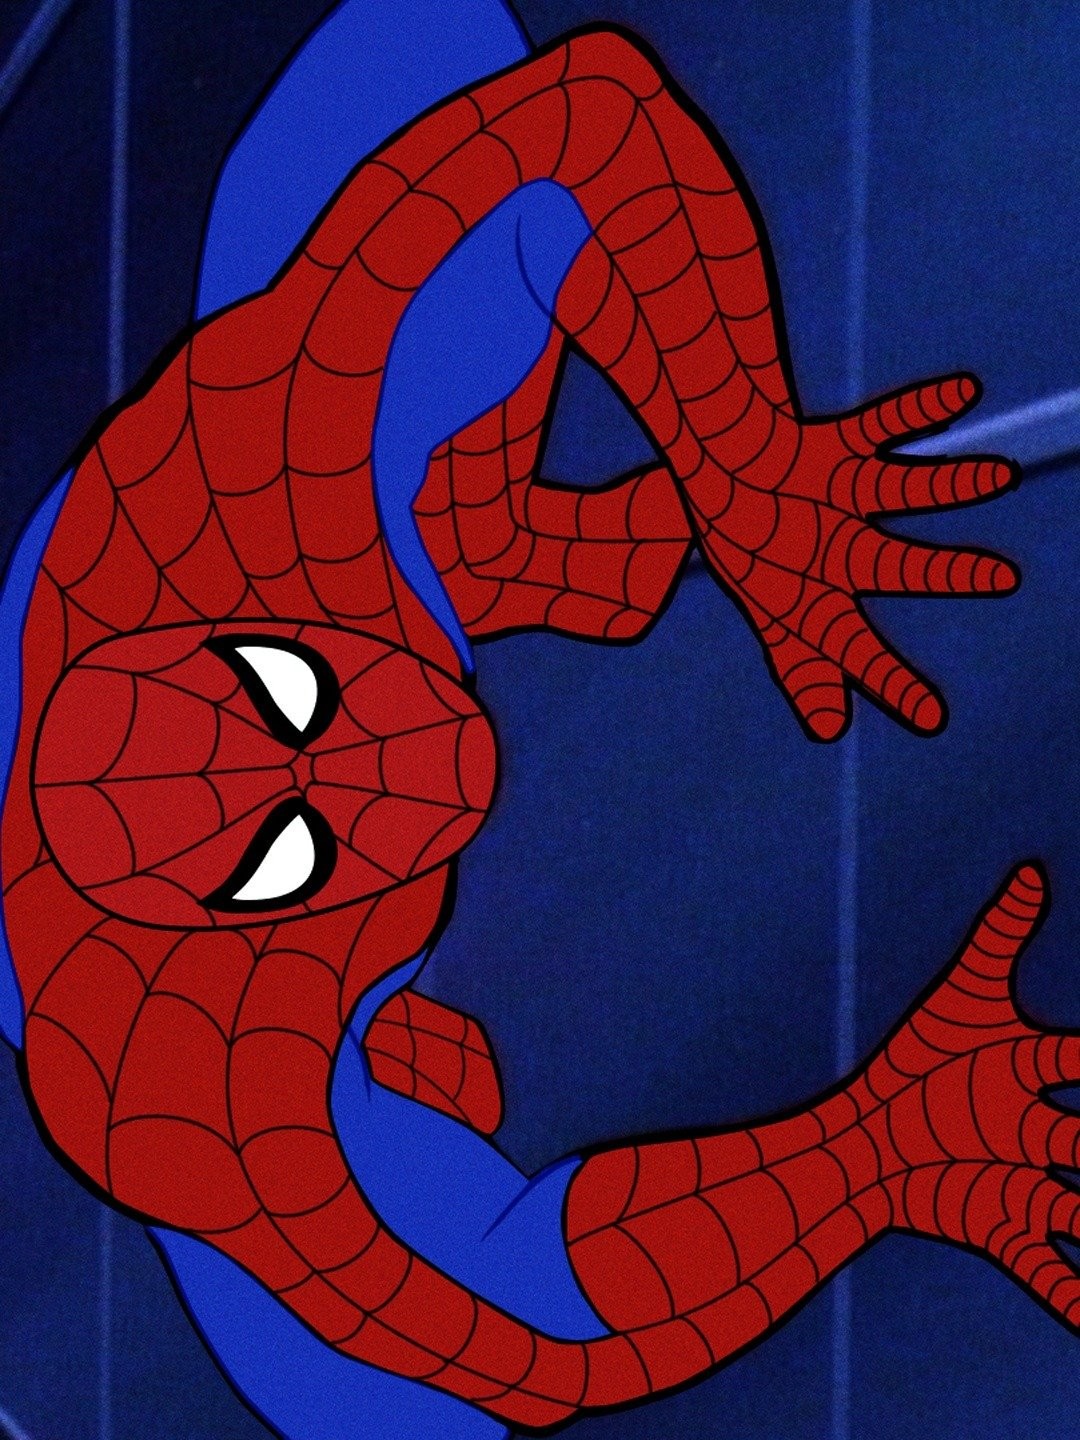 Spider-Man and His Amazing Friends - Rotten Tomatoes